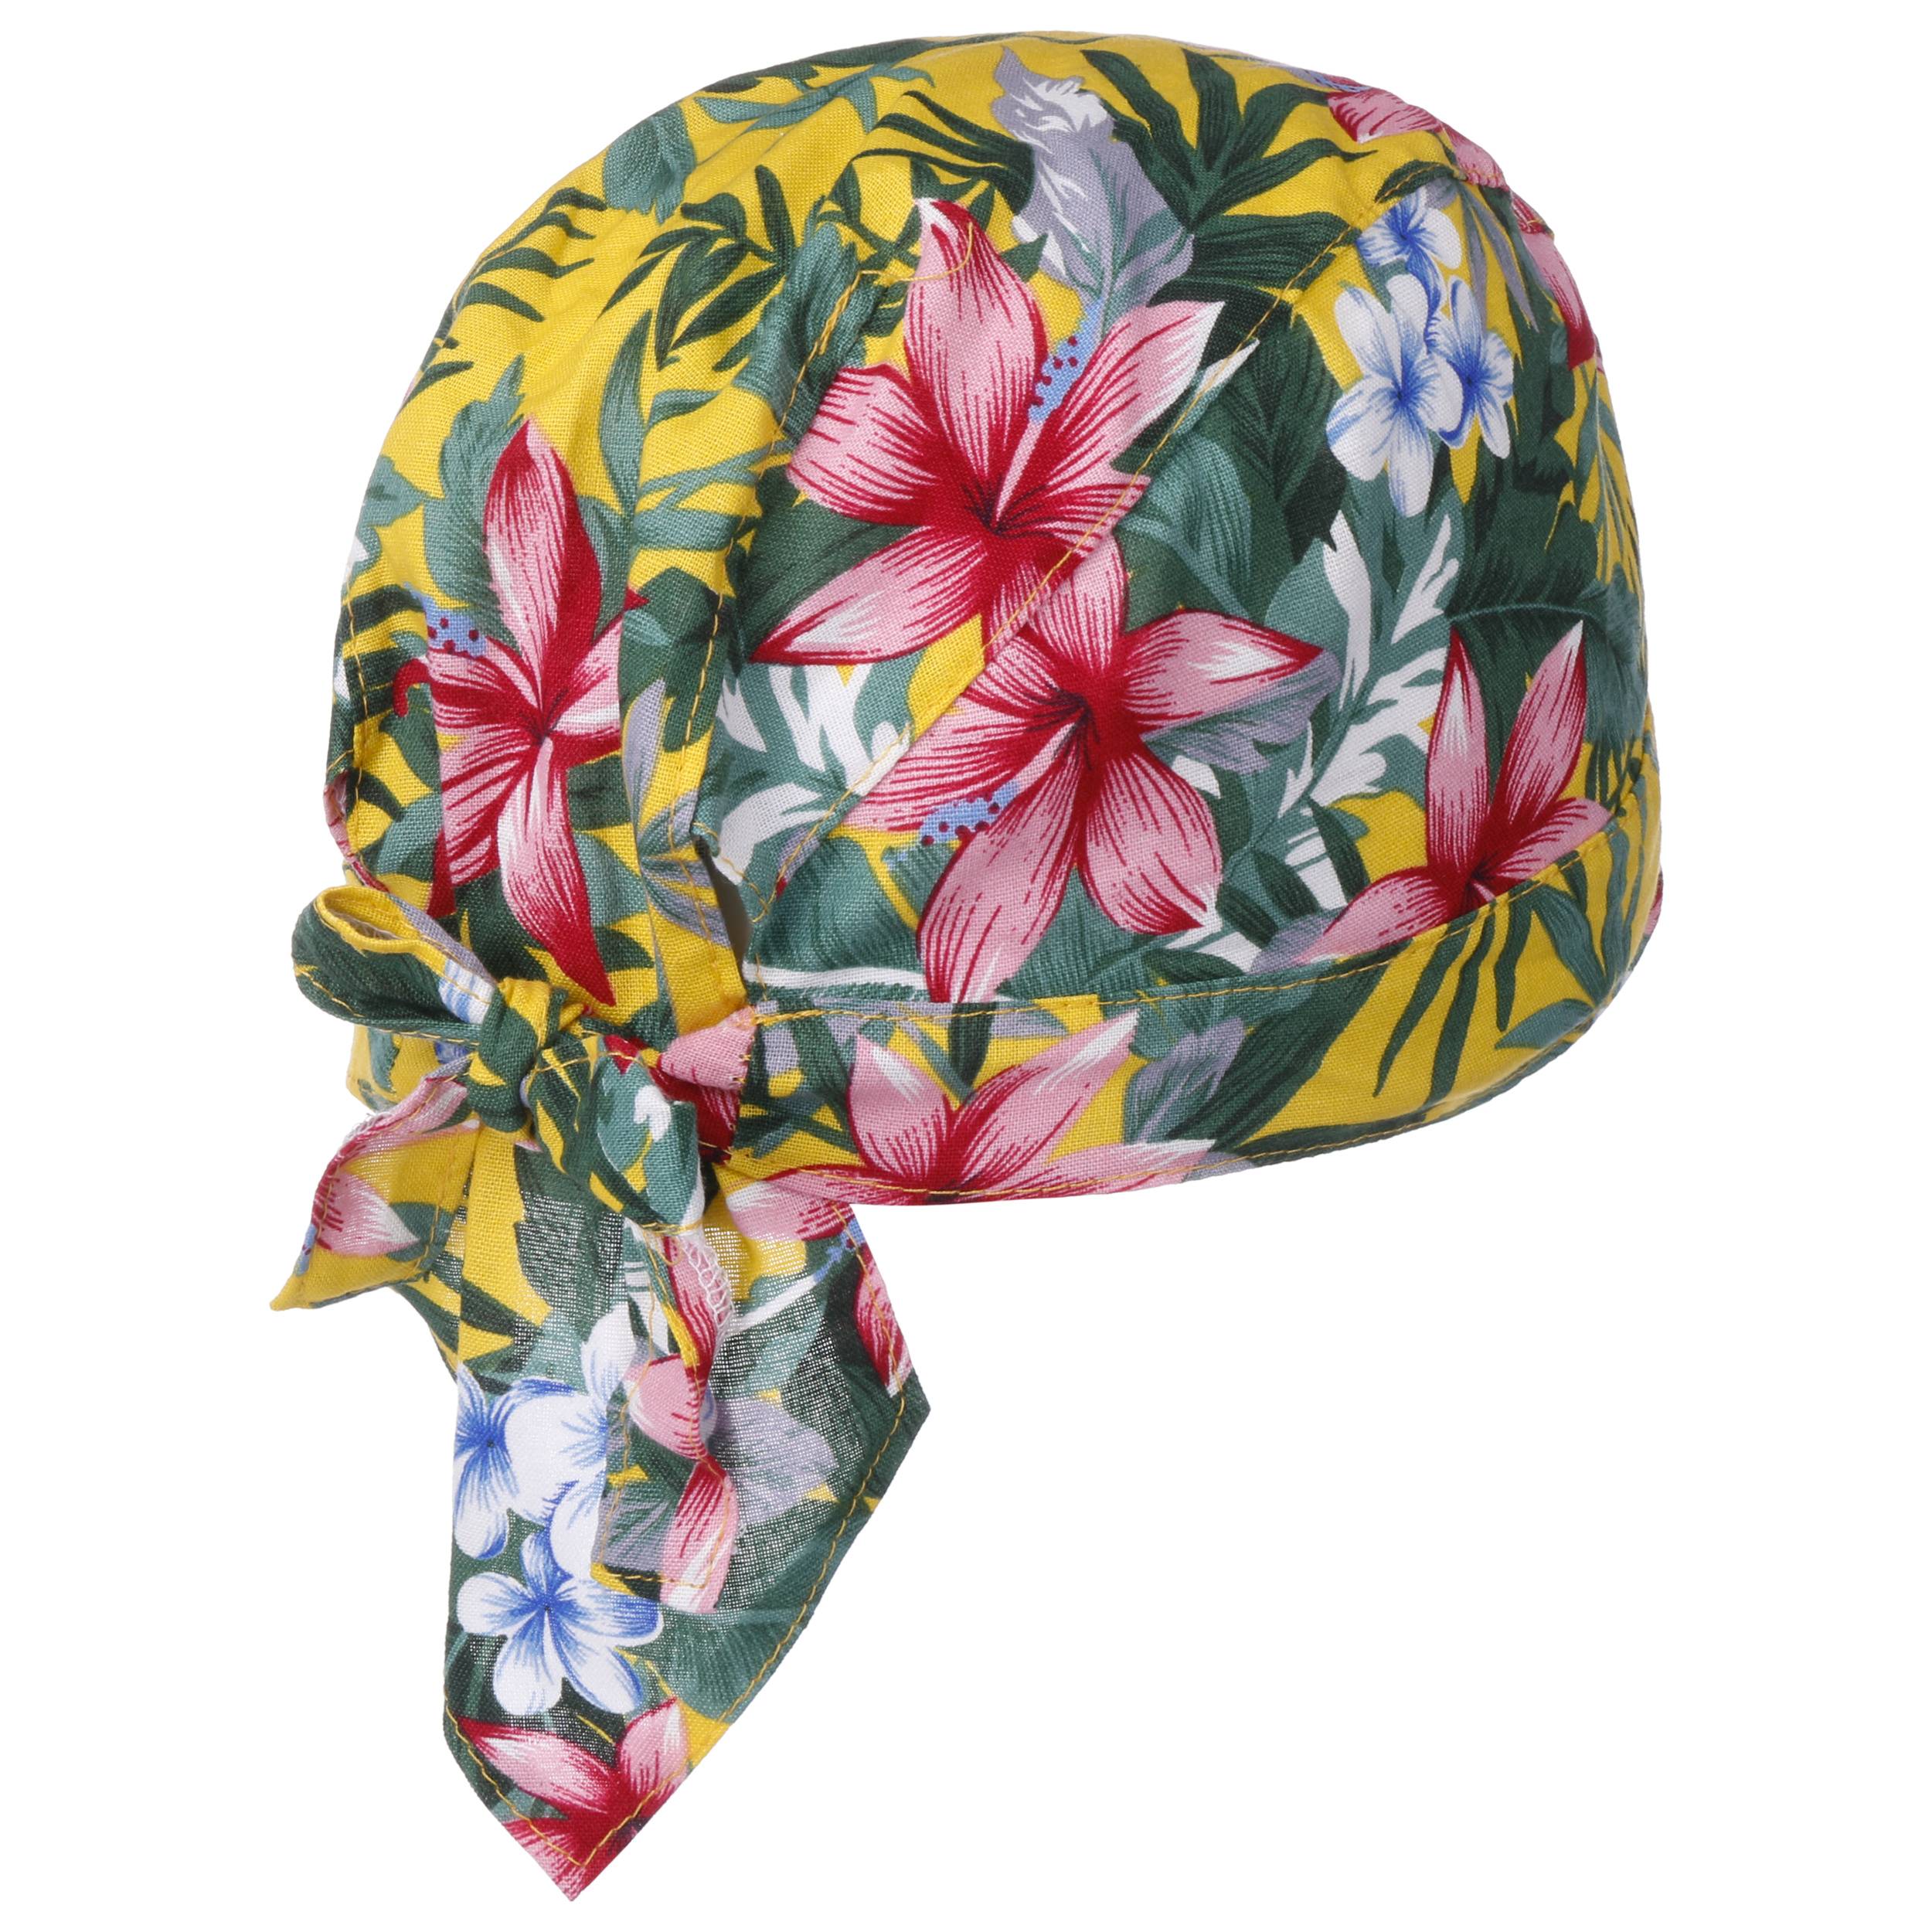 Florales Bandana with Loop by Lipodo - 17,95